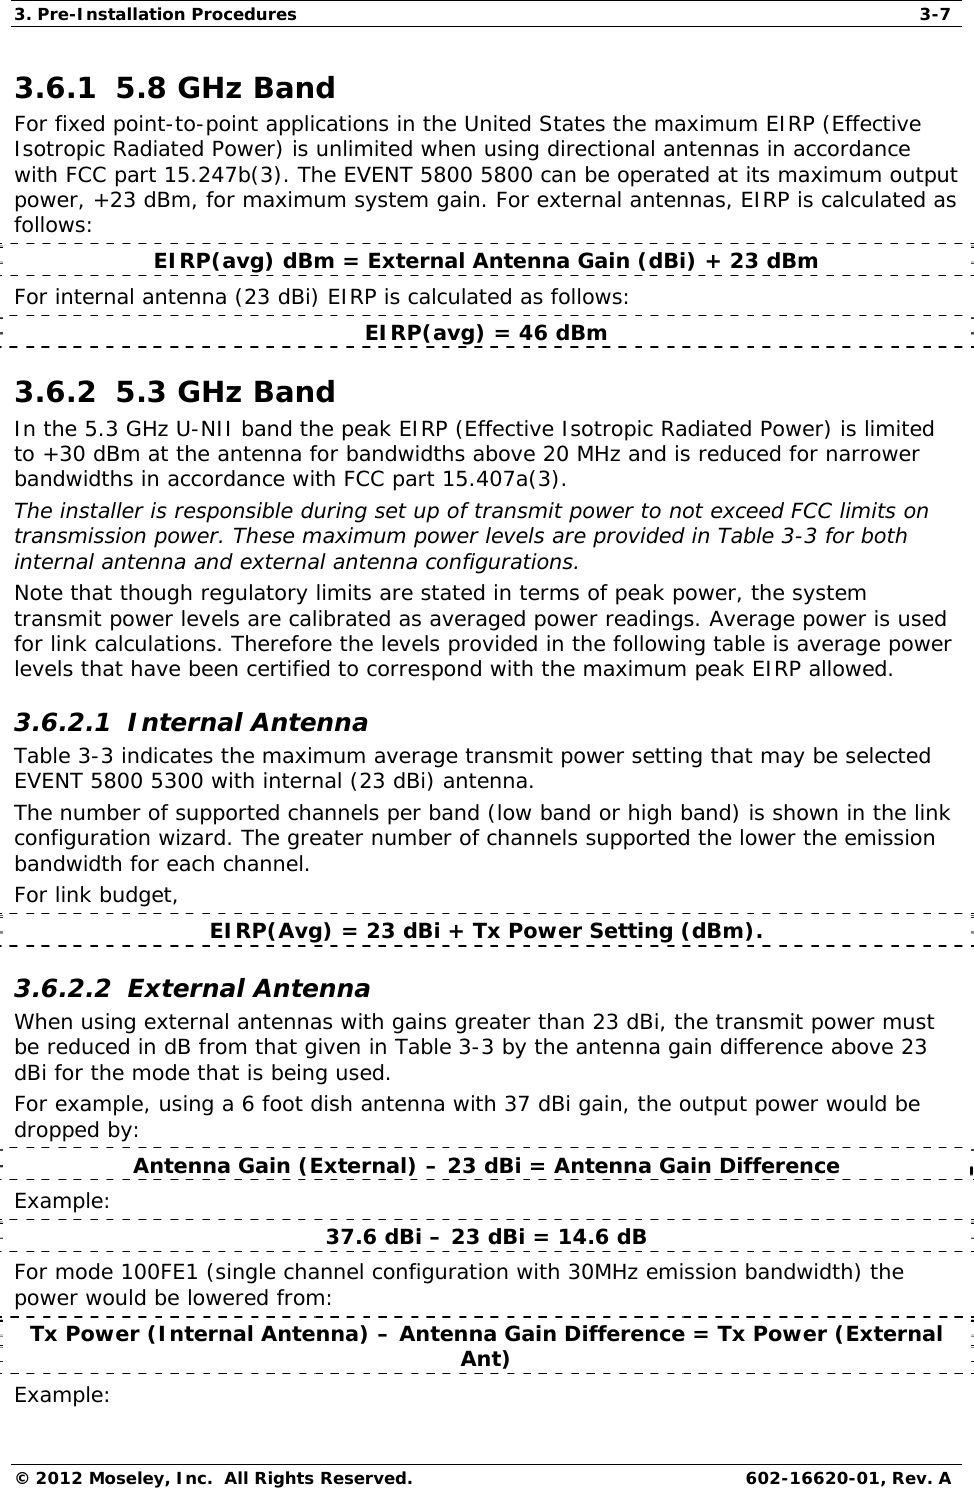 3. Pre-Installation Procedures  3-7 © 2012 Moseley, Inc.  All Rights Reserved.  602-16620-01, Rev. A 3.6.1  5.8 GHz Band  For fixed point-to-point applications in the United States the maximum EIRP (Effective Isotropic Radiated Power) is unlimited when using directional antennas in accordance with FCC part 15.247b(3). The EVENT 5800 5800 can be operated at its maximum output power, +23 dBm, for maximum system gain. For external antennas, EIRP is calculated as follows:  EIRP(avg) dBm = External Antenna Gain (dBi) + 23 dBm  For internal antenna (23 dBi) EIRP is calculated as follows:  EIRP(avg) = 46 dBm  3.6.2  5.3 GHz Band  In the 5.3 GHz U-NII band the peak EIRP (Effective Isotropic Radiated Power) is limited to +30 dBm at the antenna for bandwidths above 20 MHz and is reduced for narrower bandwidths in accordance with FCC part 15.407a(3).  The installer is responsible during set up of transmit power to not exceed FCC limits on transmission power. These maximum power levels are provided in Table 3-3 for both internal antenna and external antenna configurations.  Note that though regulatory limits are stated in terms of peak power, the system transmit power levels are calibrated as averaged power readings. Average power is used for link calculations. Therefore the levels provided in the following table is average power levels that have been certified to correspond with the maximum peak EIRP allowed.  3.6.2.1  Internal Antenna  Table 3-3 indicates the maximum average transmit power setting that may be selected EVENT 5800 5300 with internal (23 dBi) antenna.  The number of supported channels per band (low band or high band) is shown in the link configuration wizard. The greater number of channels supported the lower the emission bandwidth for each channel.  For link budget,  EIRP(Avg) = 23 dBi + Tx Power Setting (dBm).  3.6.2.2  External Antenna  When using external antennas with gains greater than 23 dBi, the transmit power must be reduced in dB from that given in Table 3-3 by the antenna gain difference above 23 dBi for the mode that is being used.  For example, using a 6 foot dish antenna with 37 dBi gain, the output power would be dropped by:  Antenna Gain (External) – 23 dBi = Antenna Gain Difference Example: 37.6 dBi – 23 dBi = 14.6 dB  For mode 100FE1 (single channel configuration with 30MHz emission bandwidth) the power would be lowered from:  Tx Power (Internal Antenna) – Antenna Gain Difference = Tx Power (External Ant) Example:  